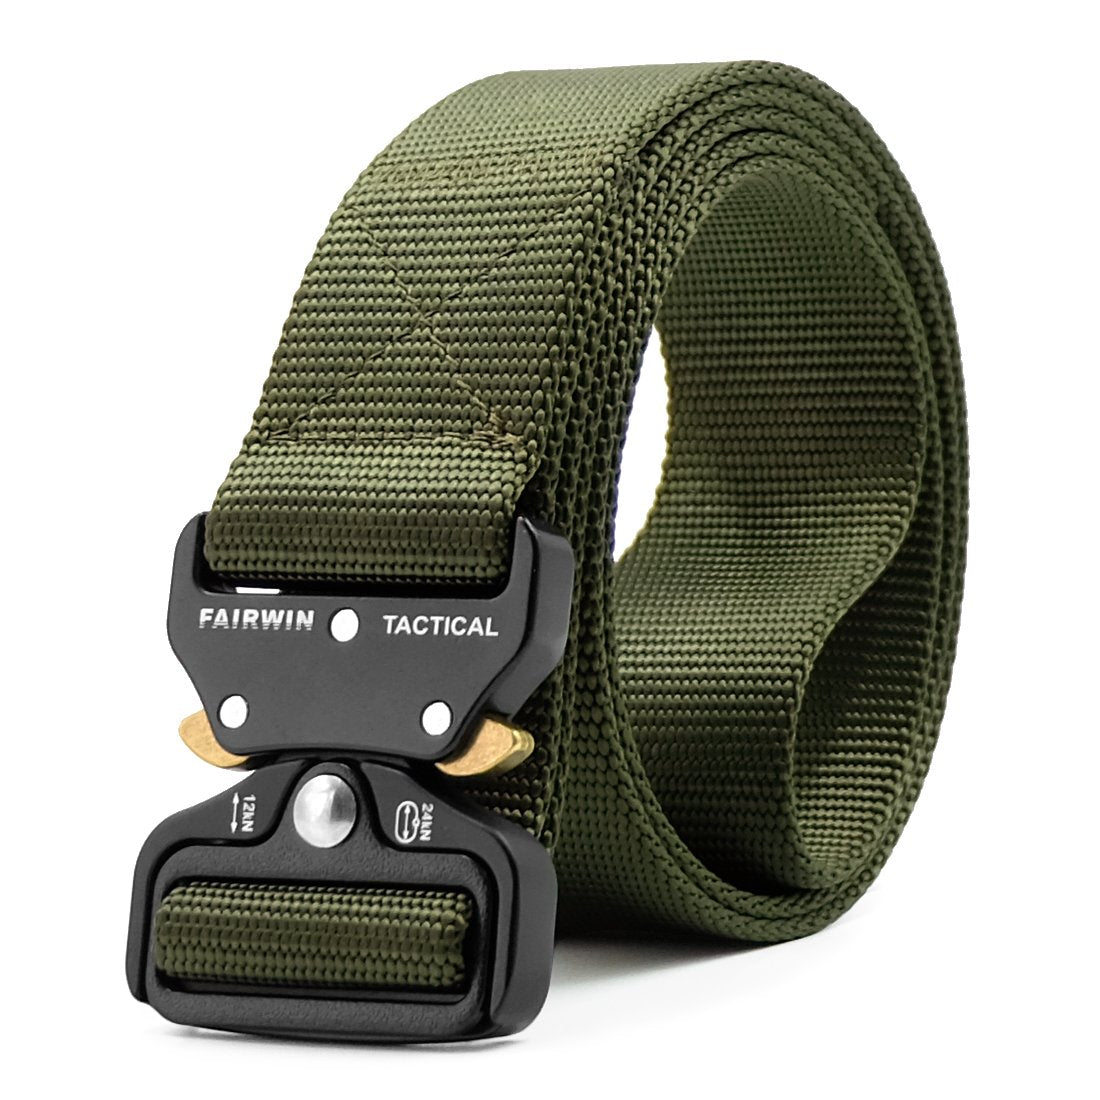 Military Style Webbing Riggers Nylon Belt with Heavy-Duty Quick-Release Metal Buckle 1.5 Wide WERFORU Tactical Belt